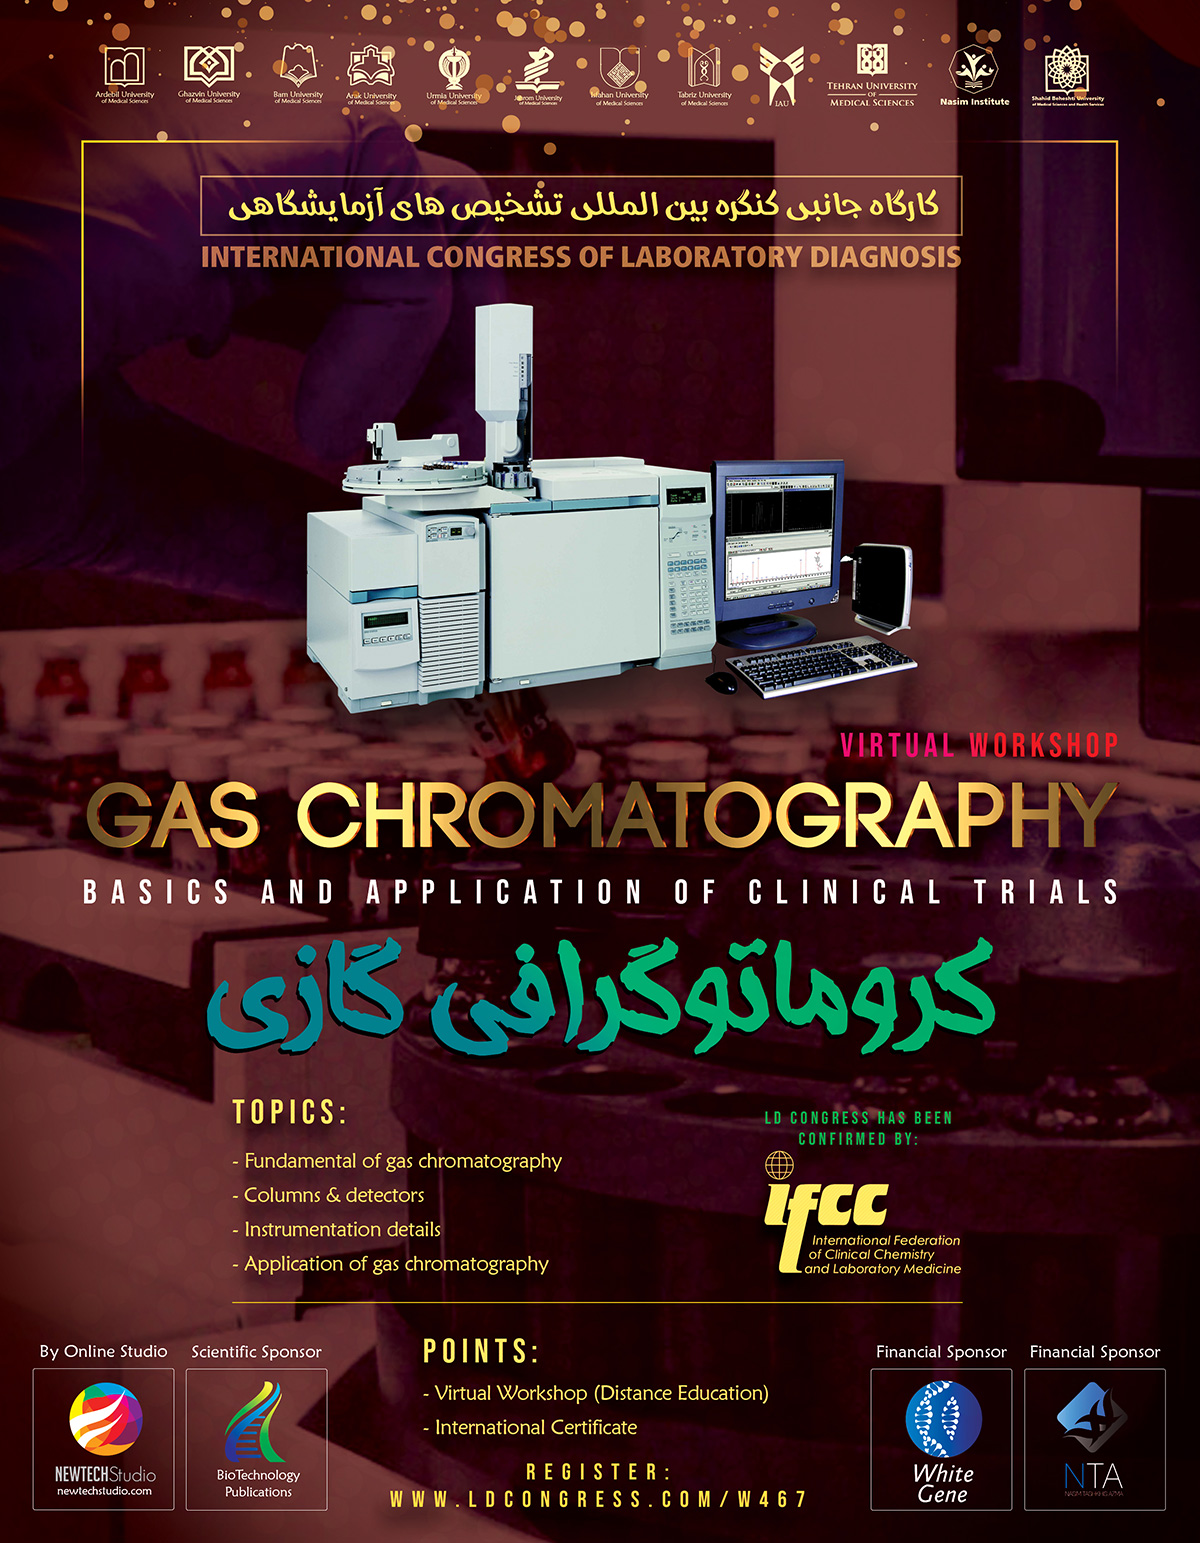 Gas chromatography, Fundamentals and application in clinical assessment